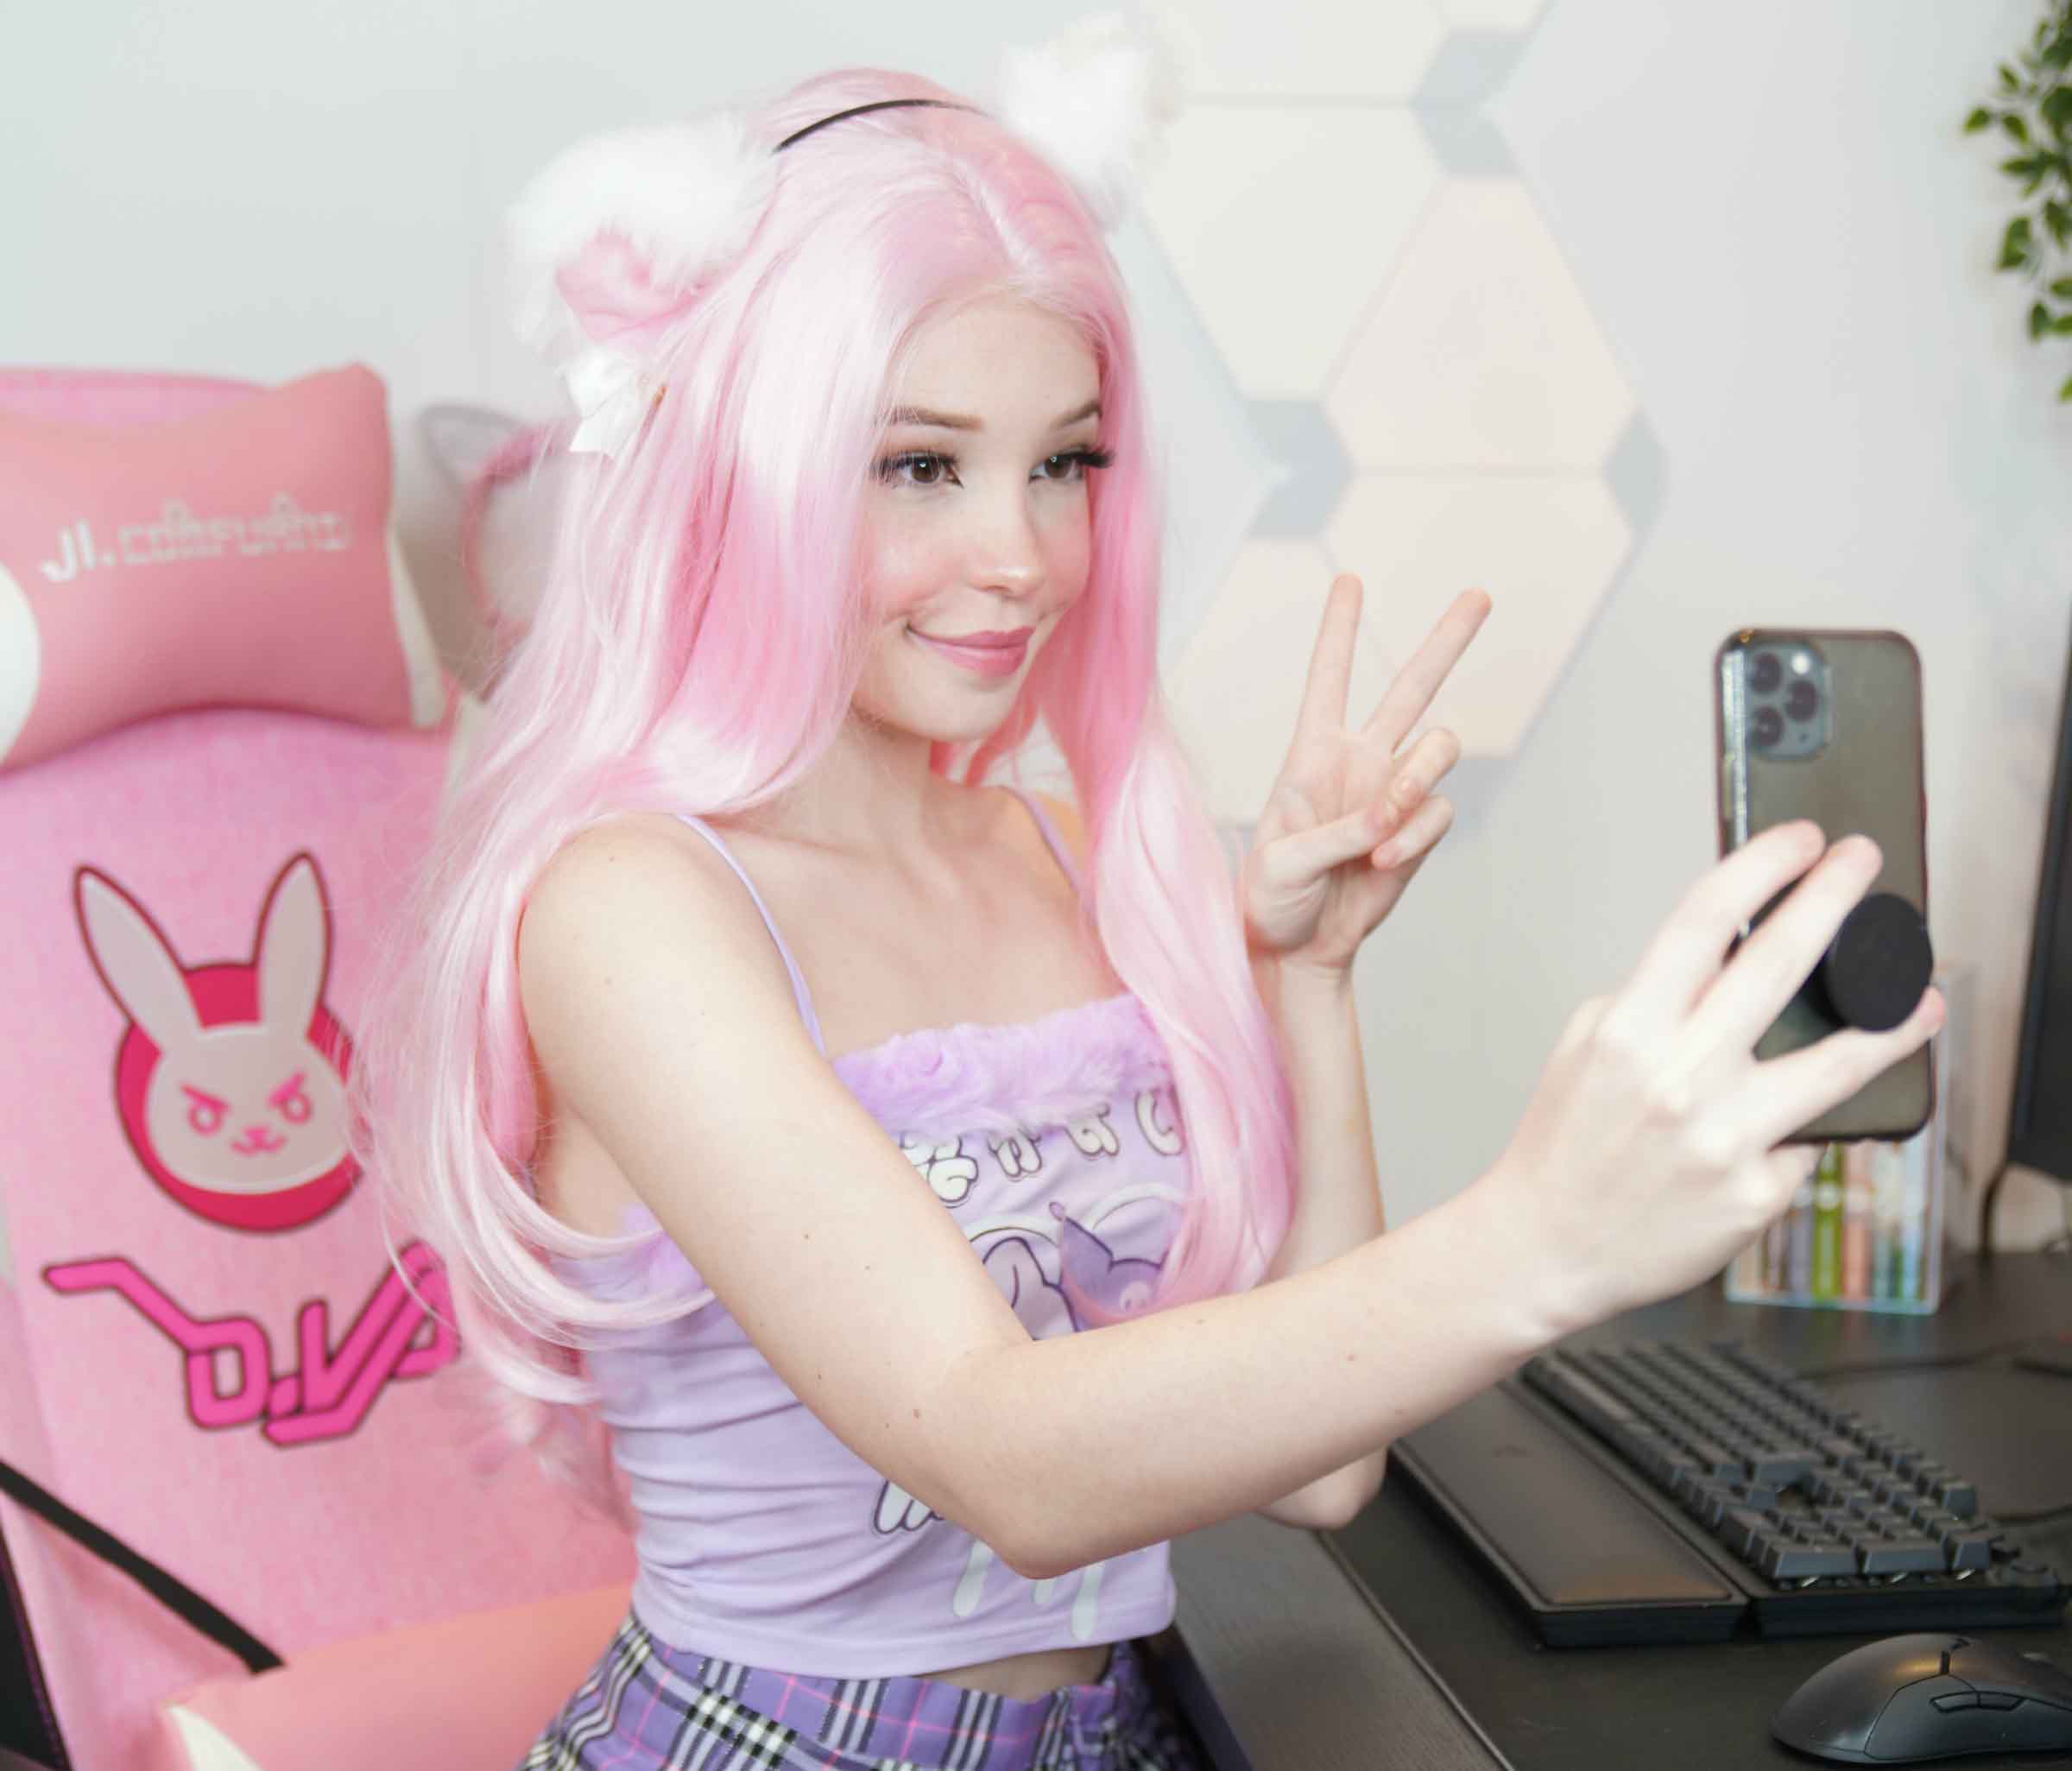 Where is Belle Delphine now? 